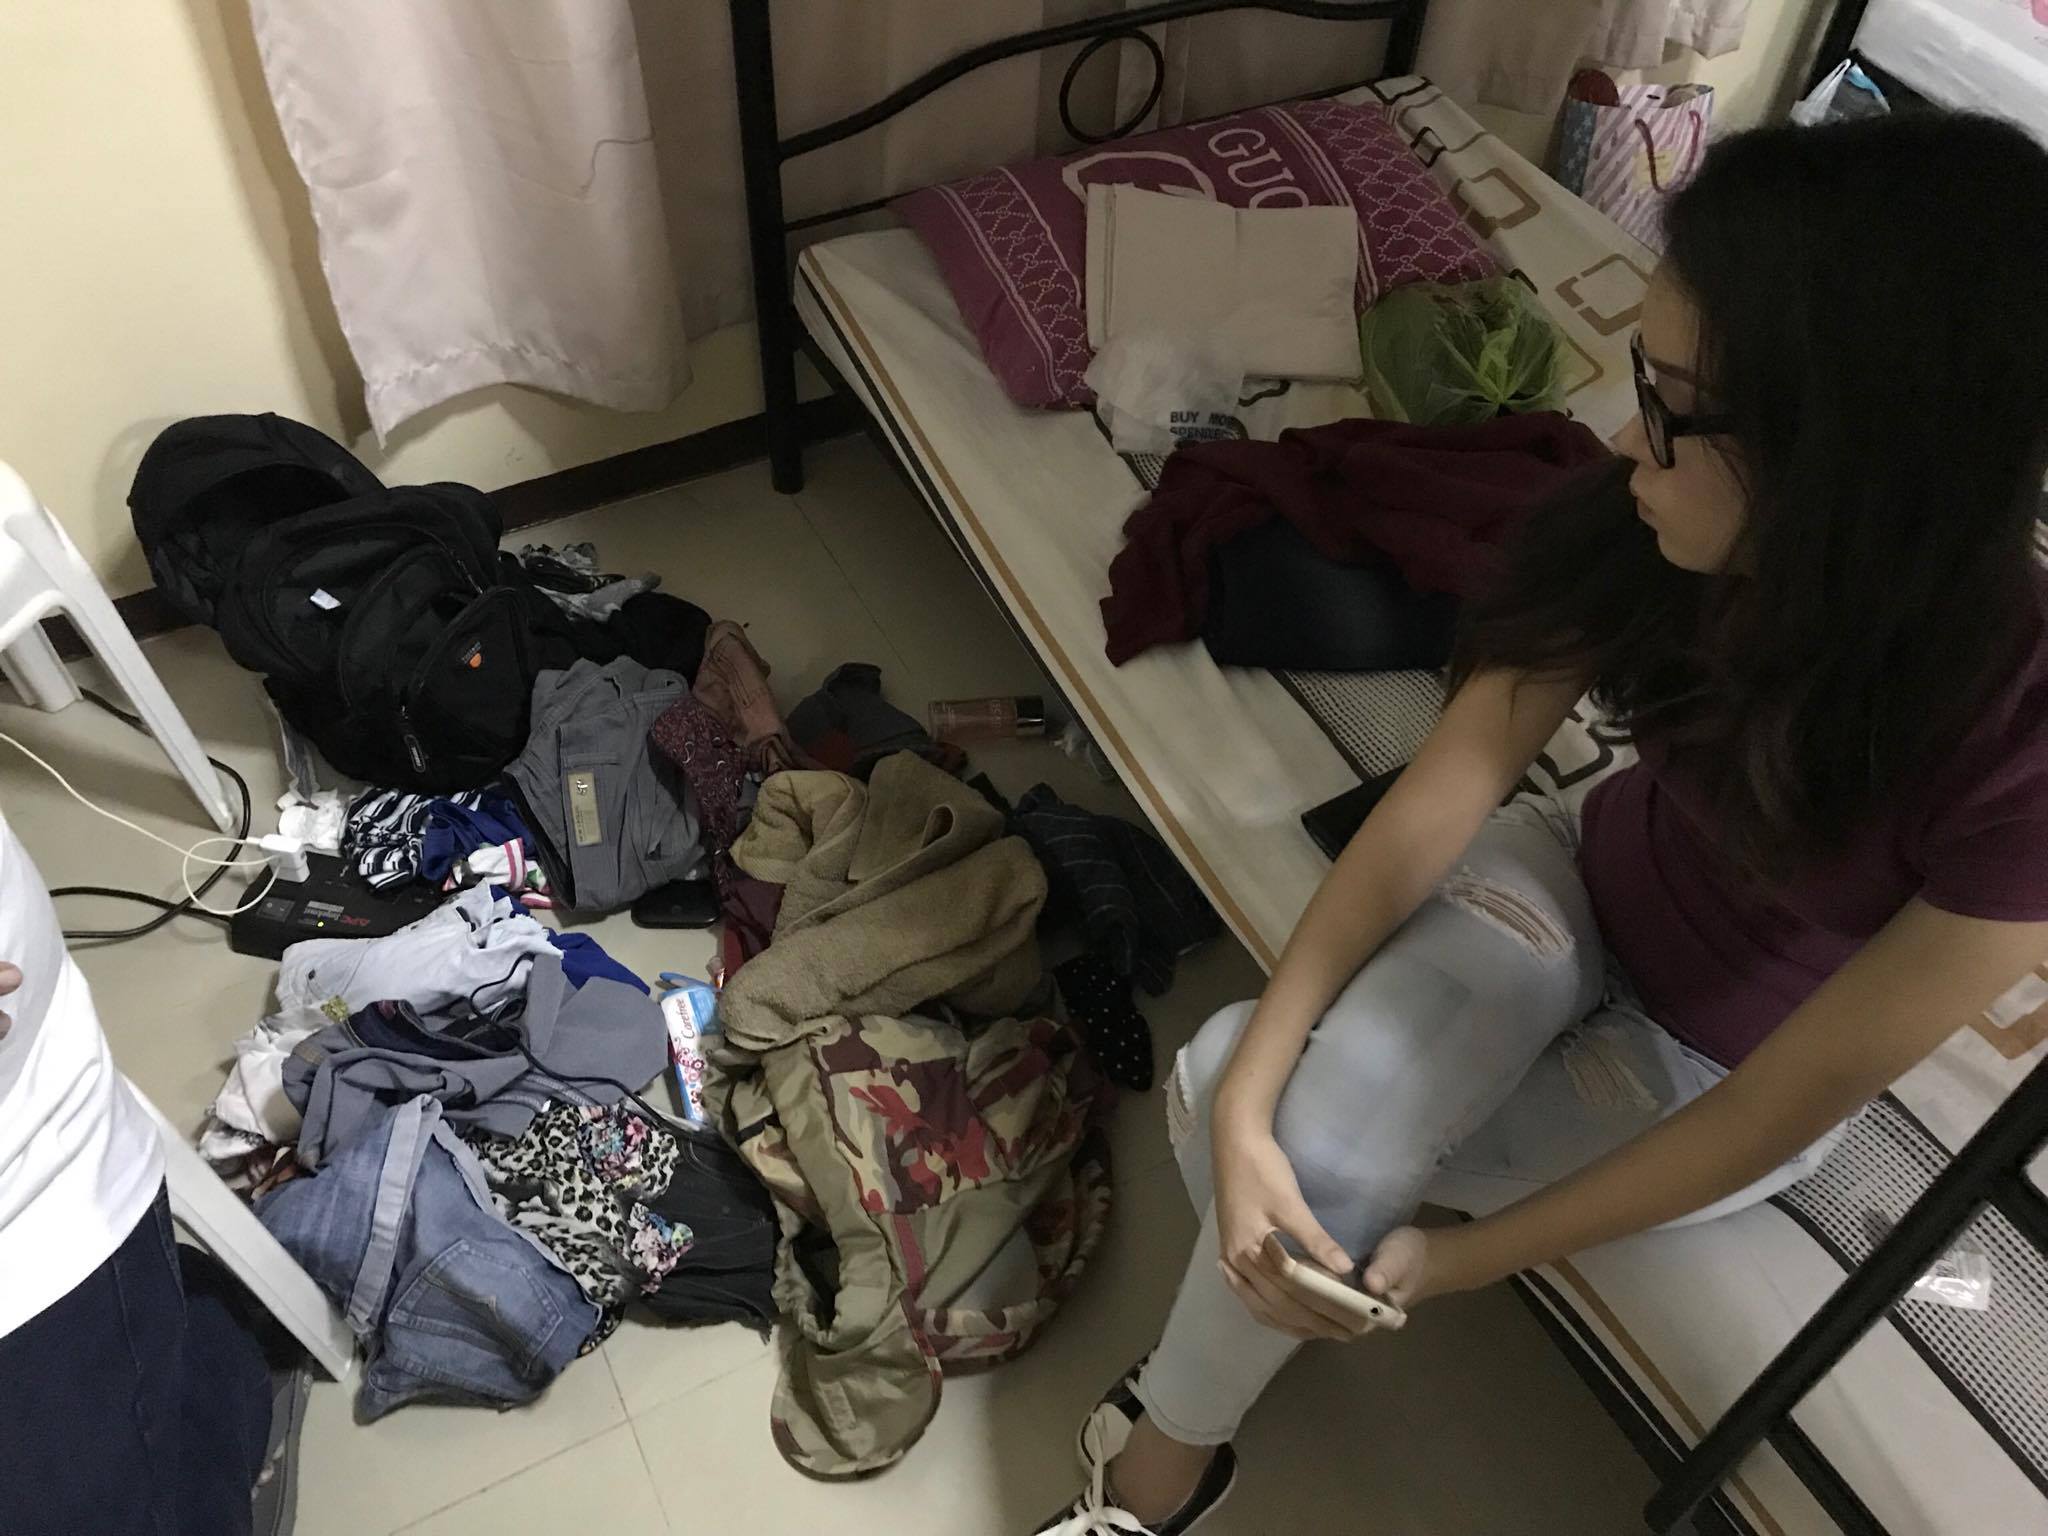 BURGLARIZED. Mr. SCUAA candidate, Reigndoulf Quirong's belongings strewn in the floor after being looted. Photo by Jed Asaph Cortes